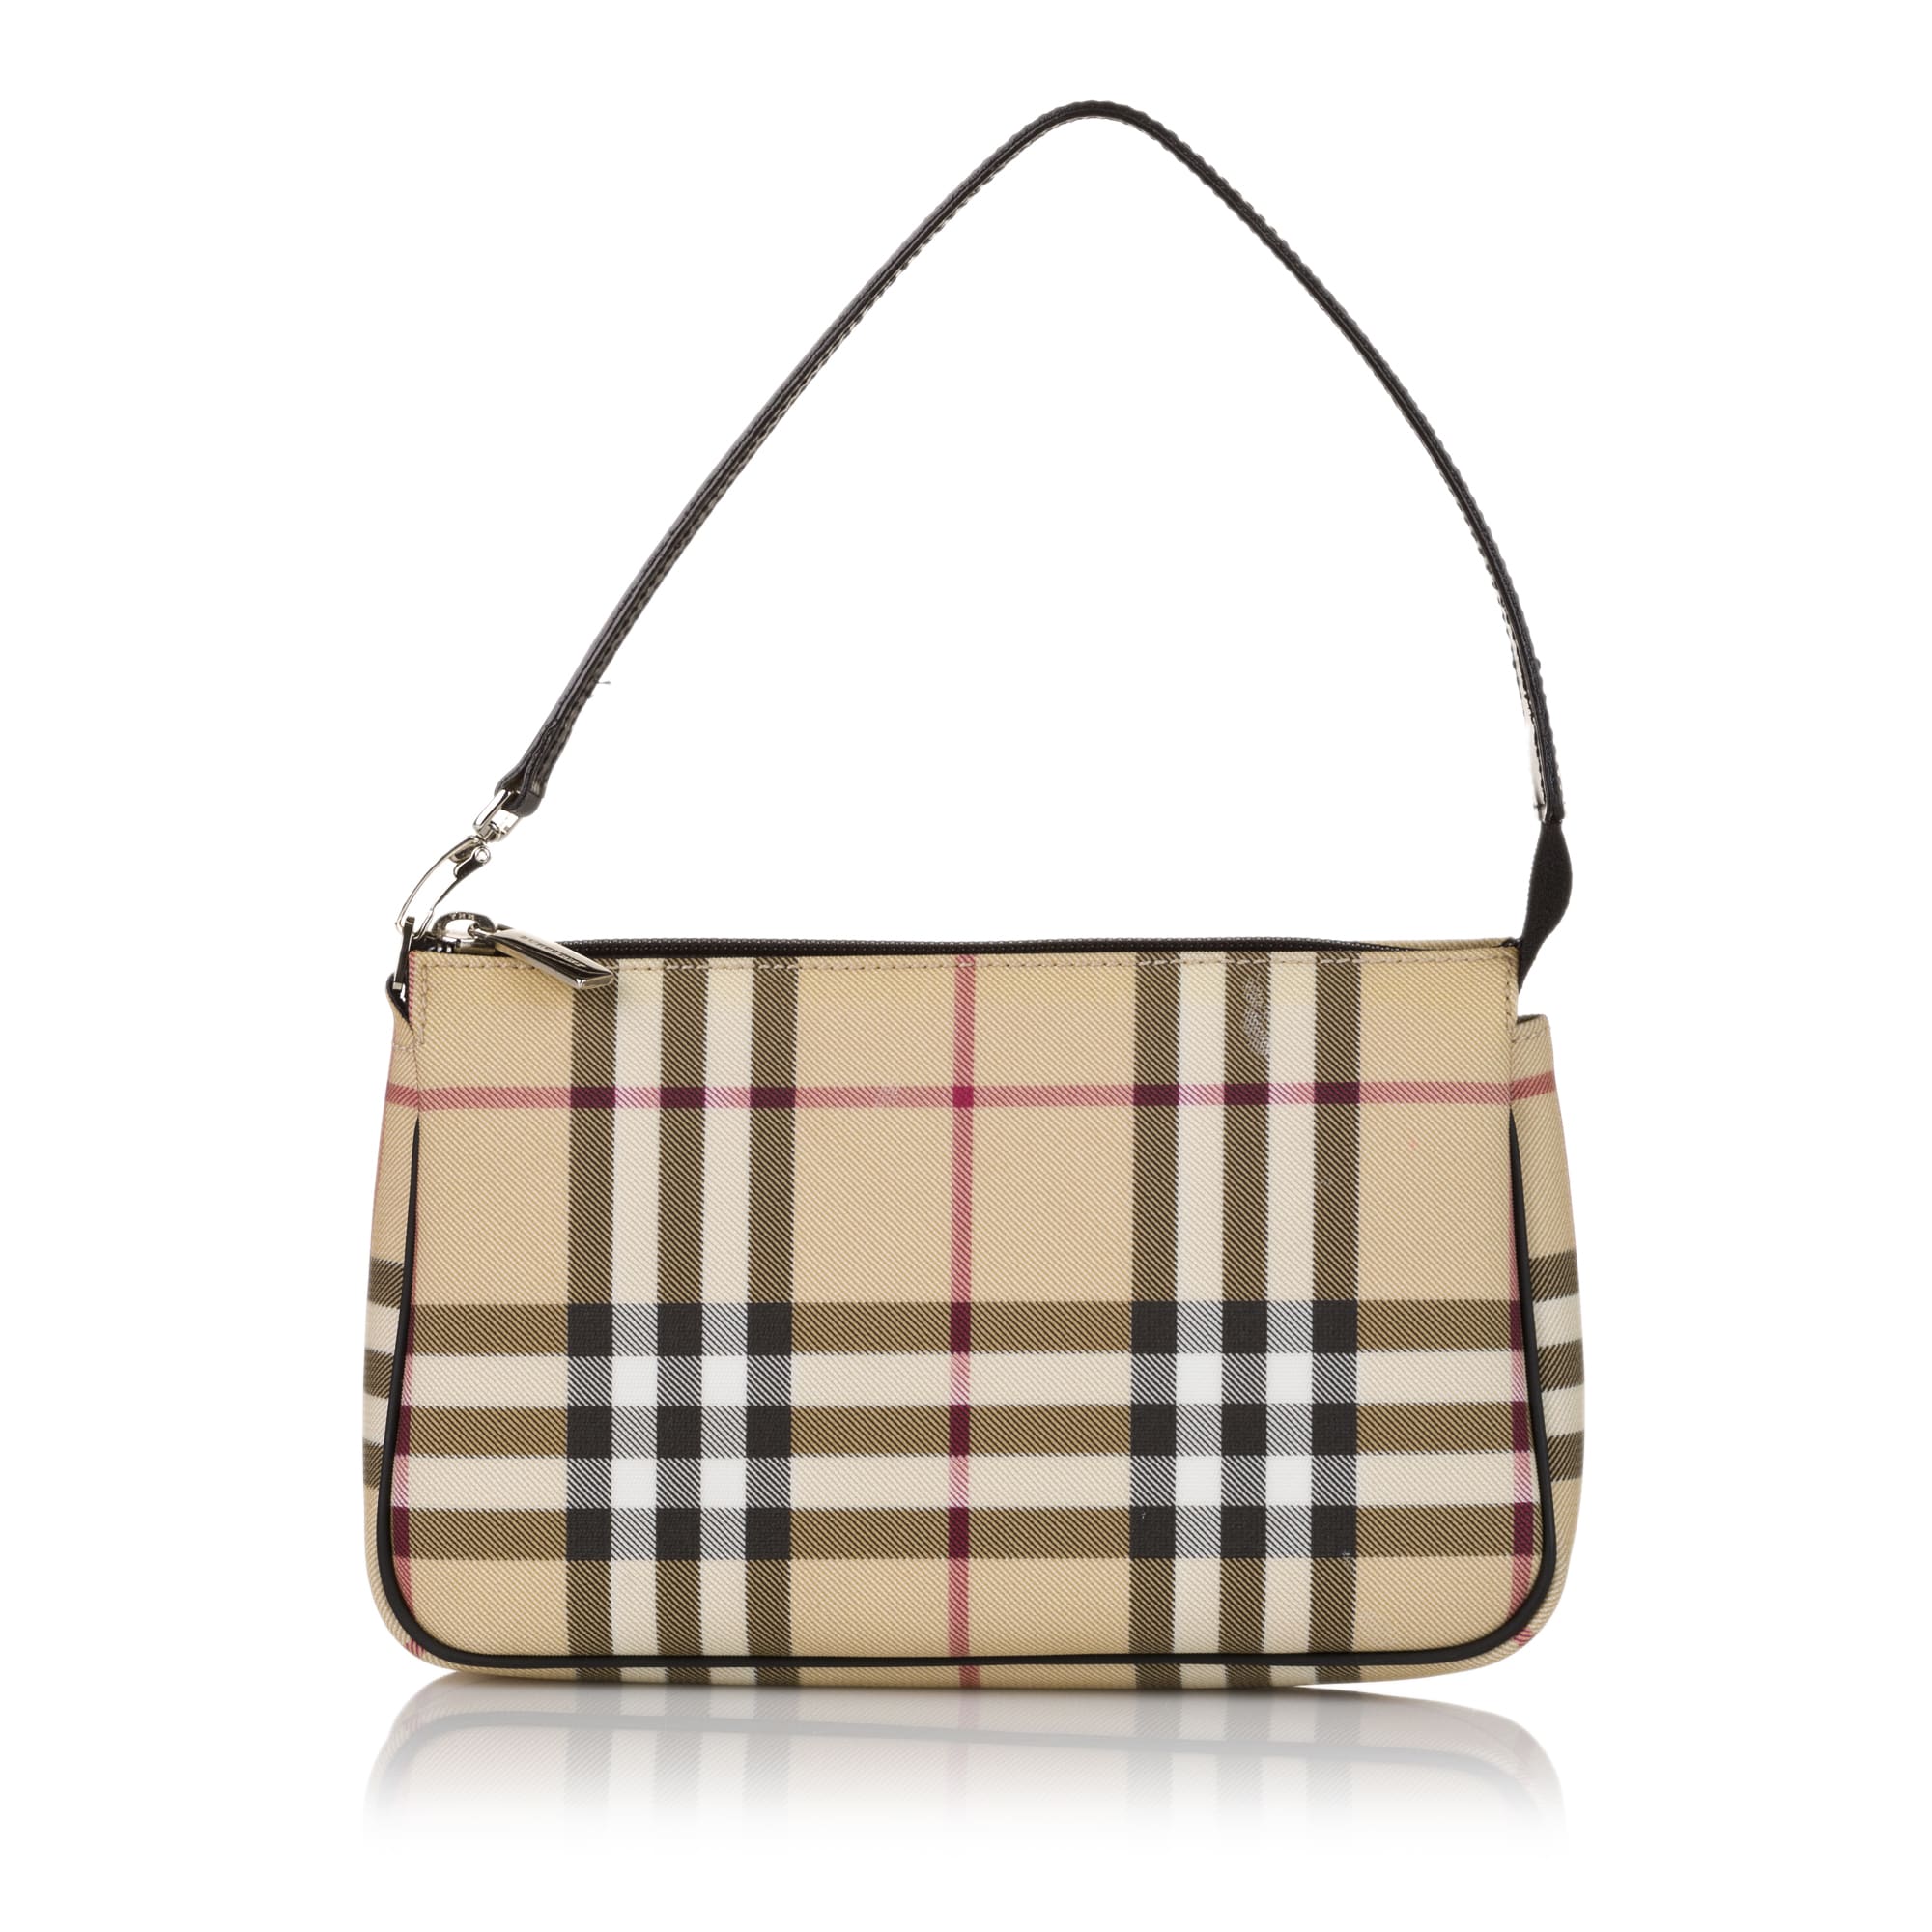 Burberry House Check Baguette, ONESIZE, beige